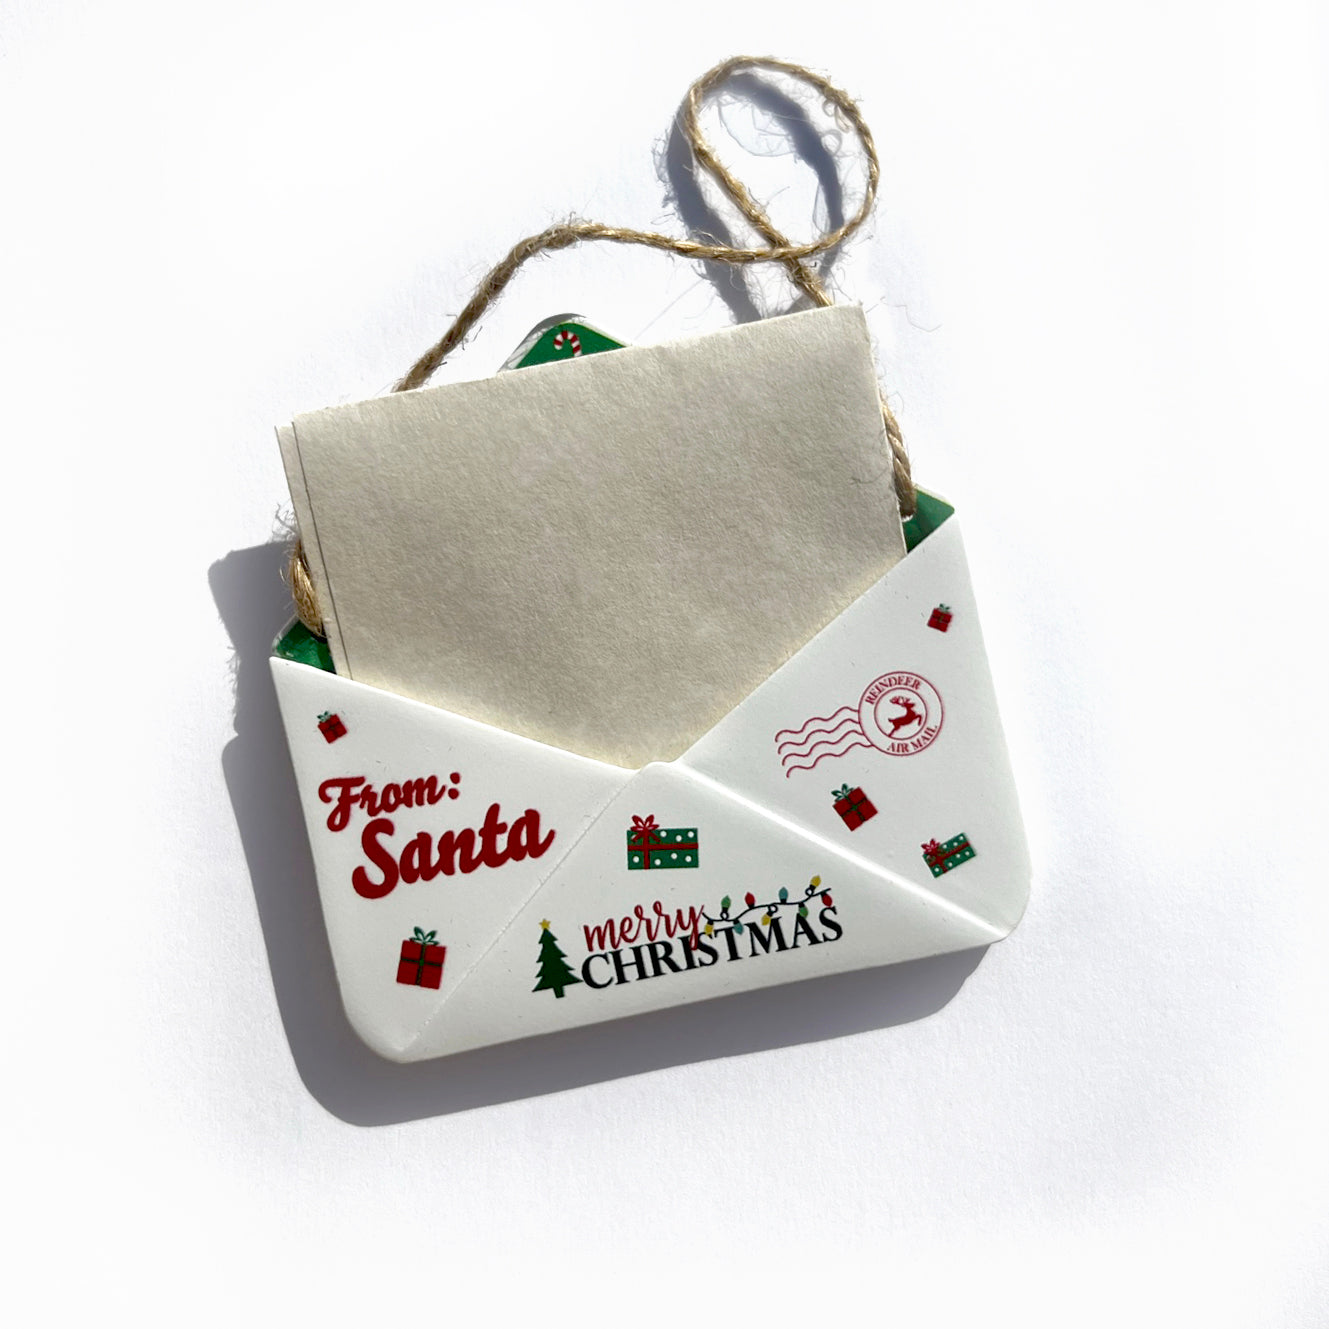 Christmas Collection (Note From Santa) Green Candy Cane Envelope Resin Ornament